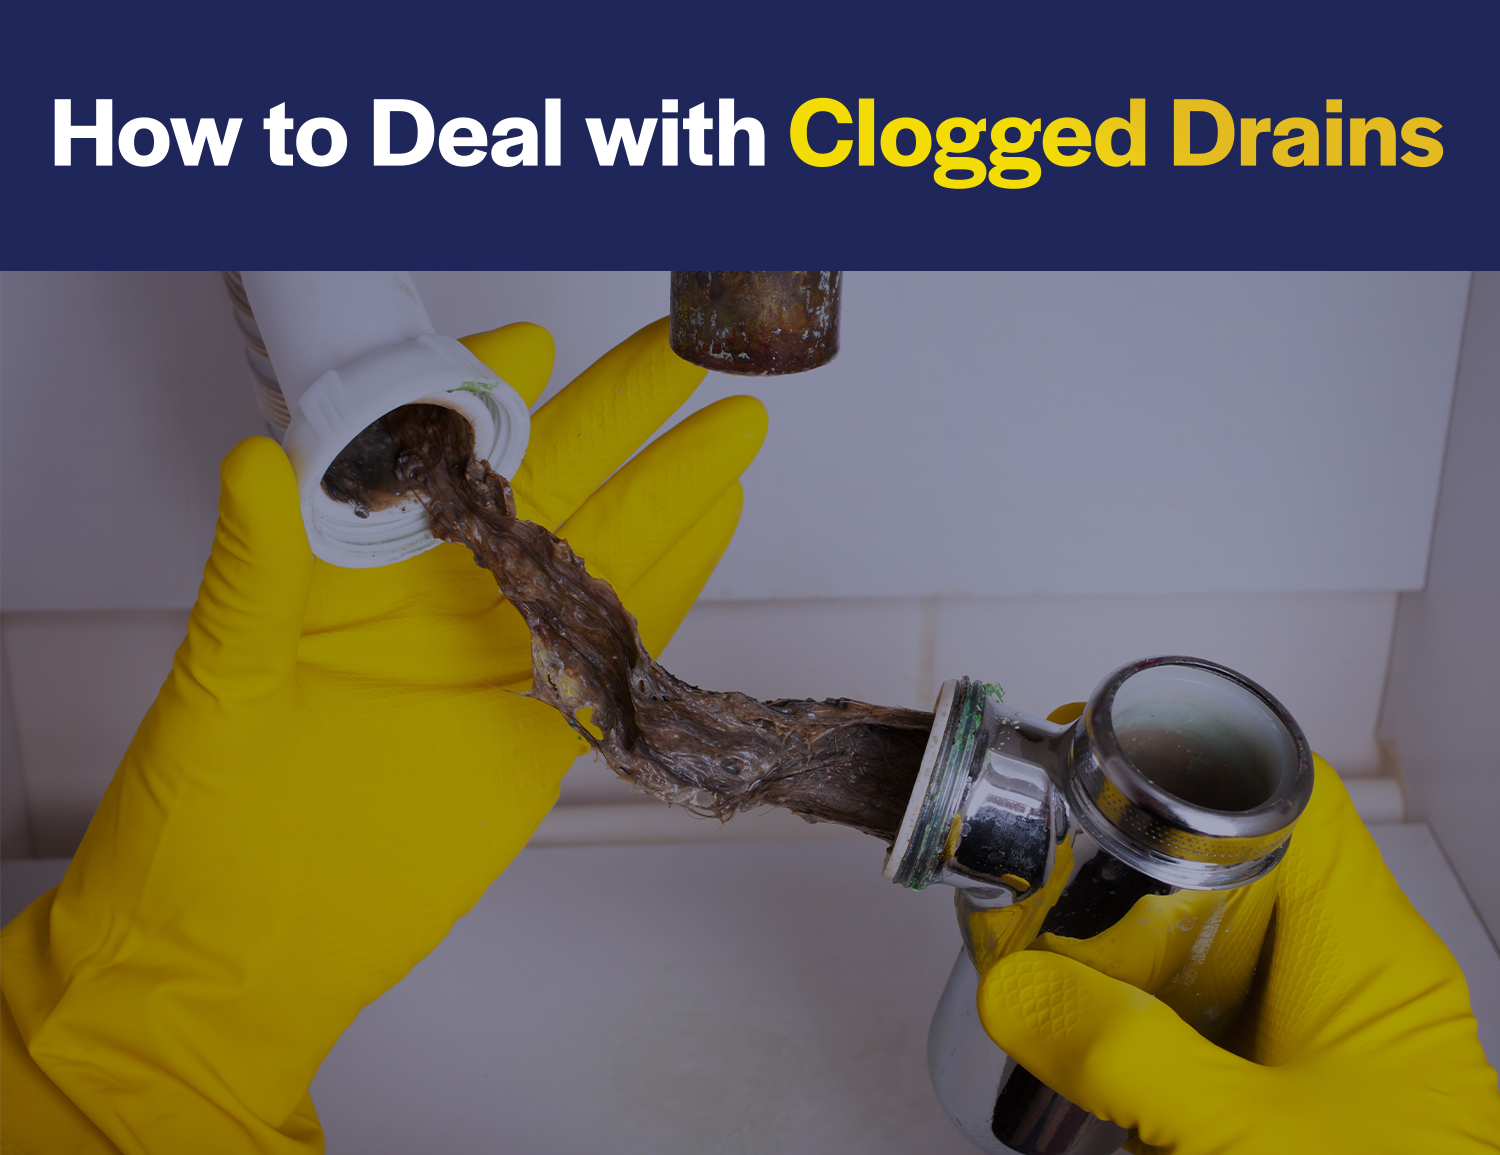 How to Deal with Clogged Drains